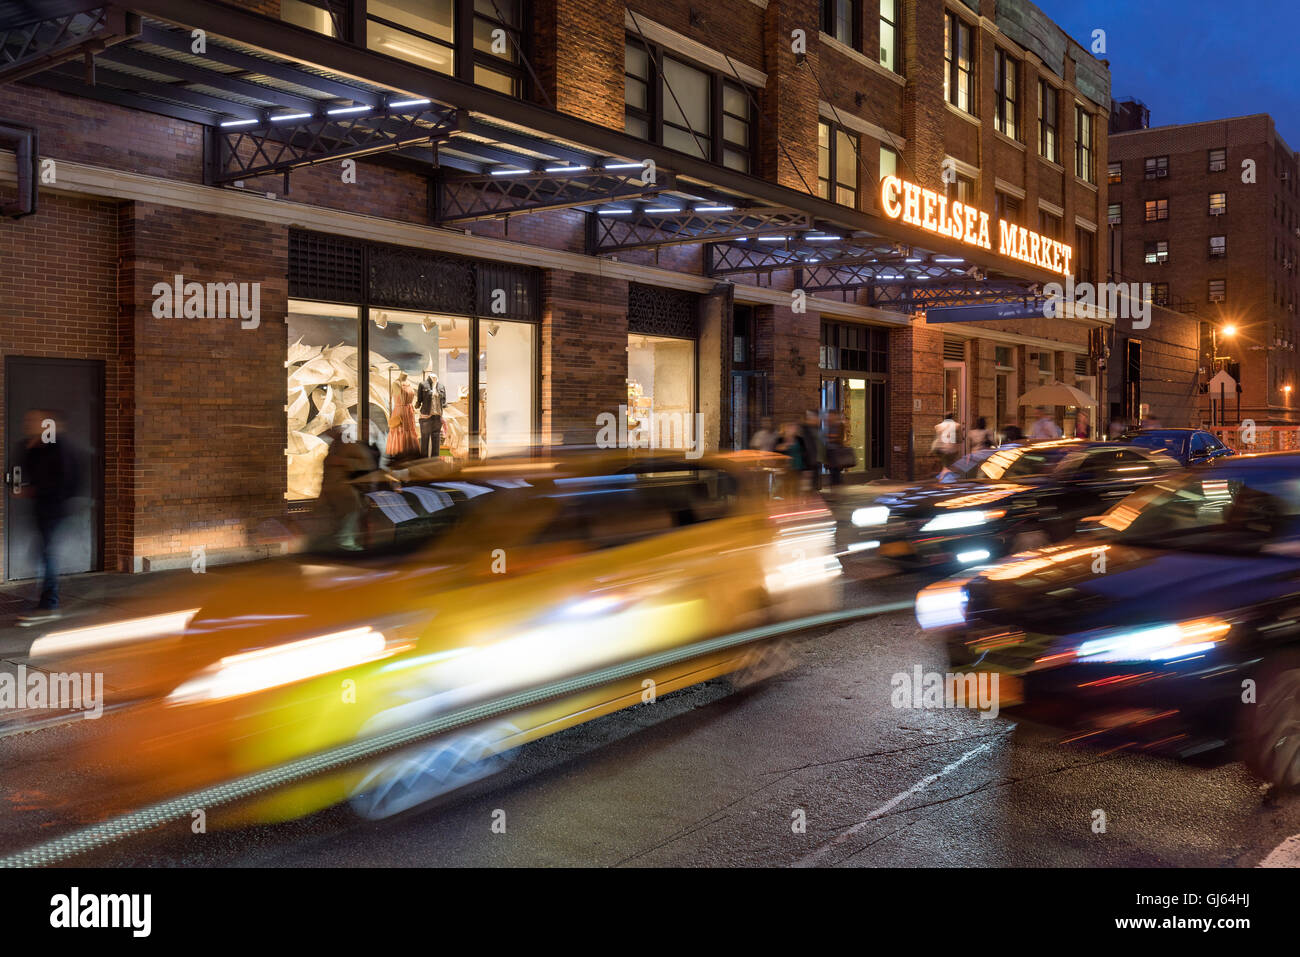 Chelsea Market entrance on 10th Avenue at dusk with traffic and car light trails. Chelsea, Manhattan, New York City, USA Stock Photo